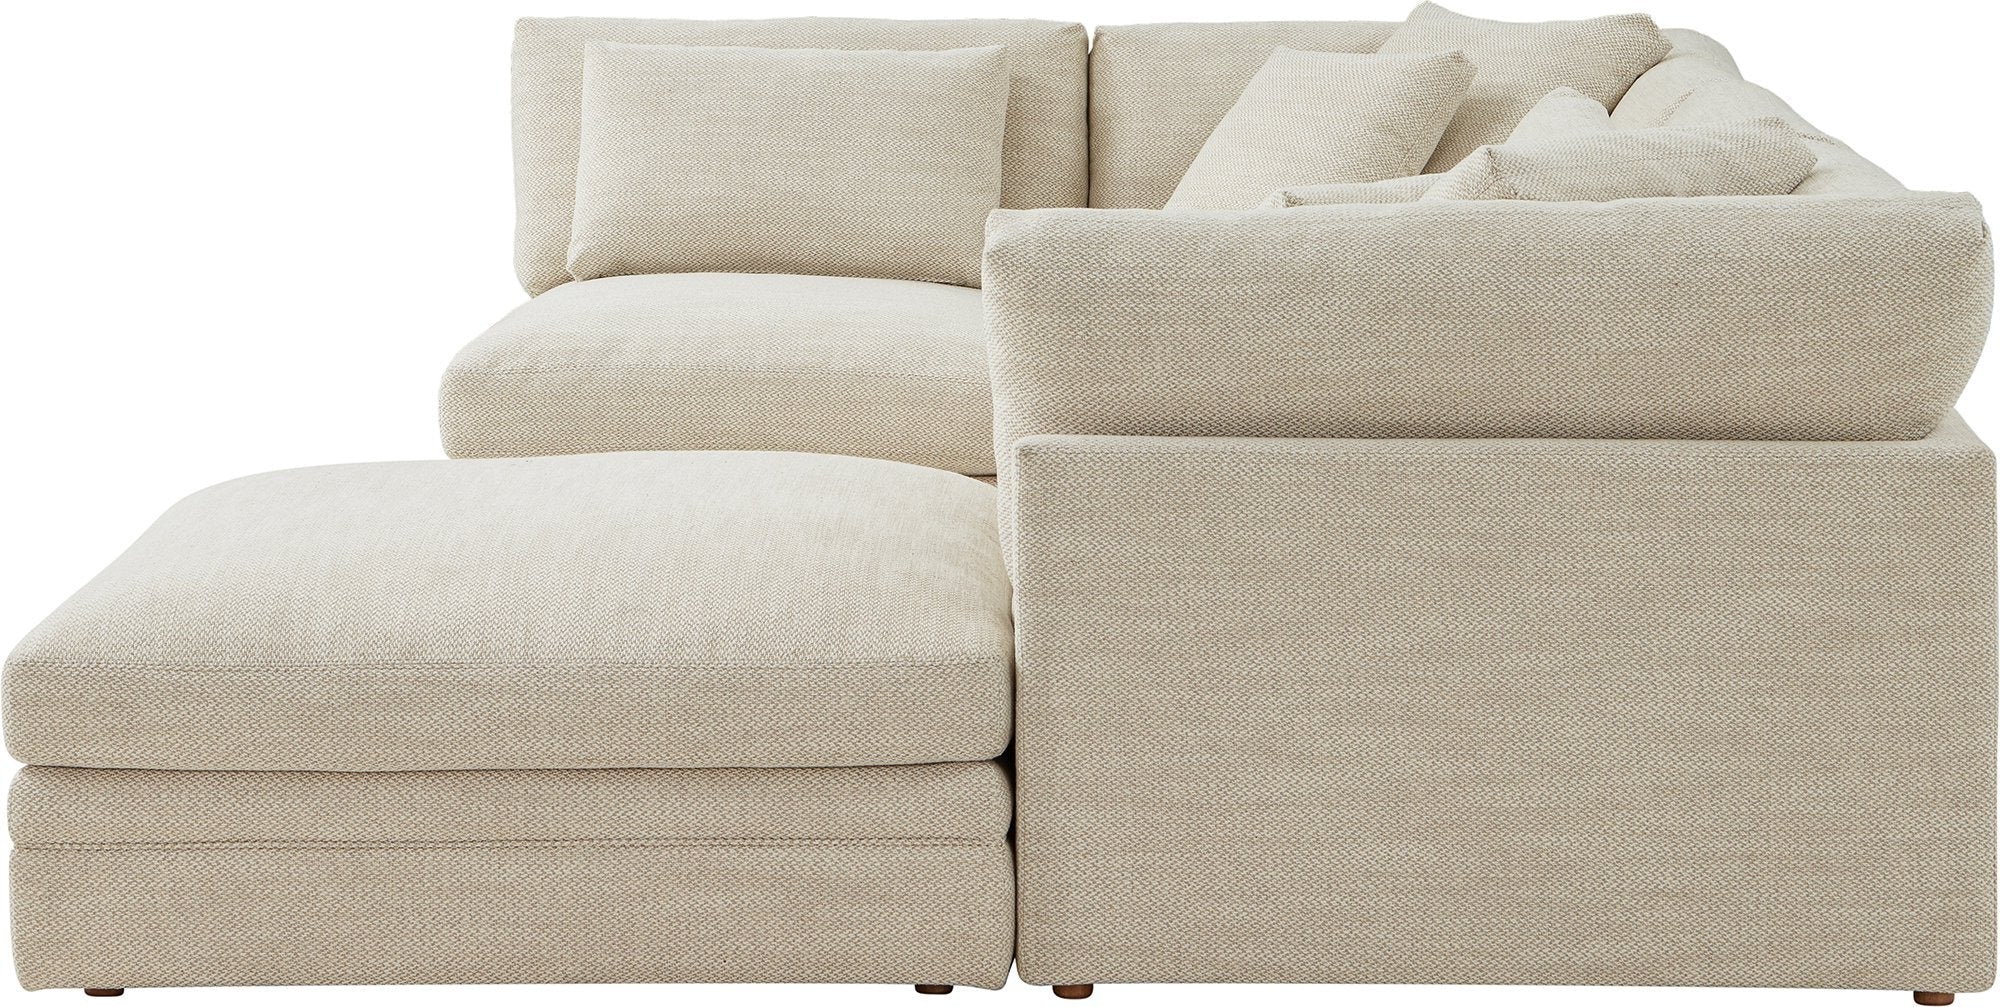 Feel Good Sectional with Ottoman, Left, Oyster - Image 8